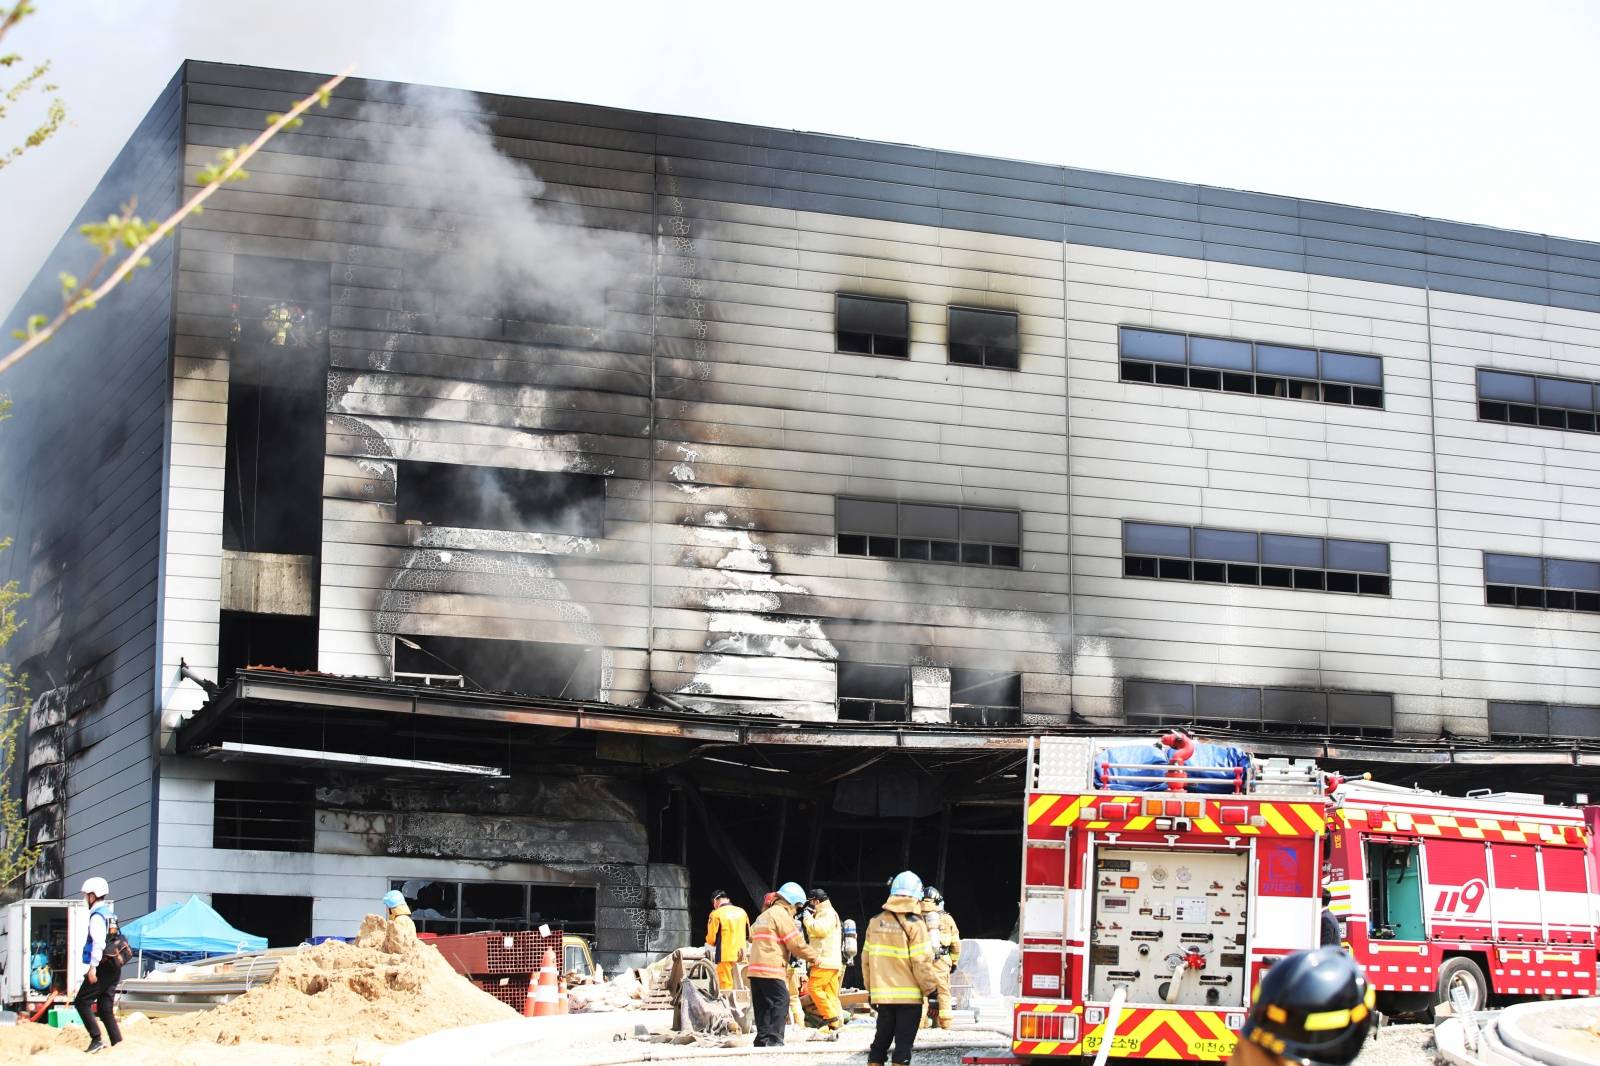 Smoke rises from a warehouse which is currently under construction, after it caught fire, in Icheon